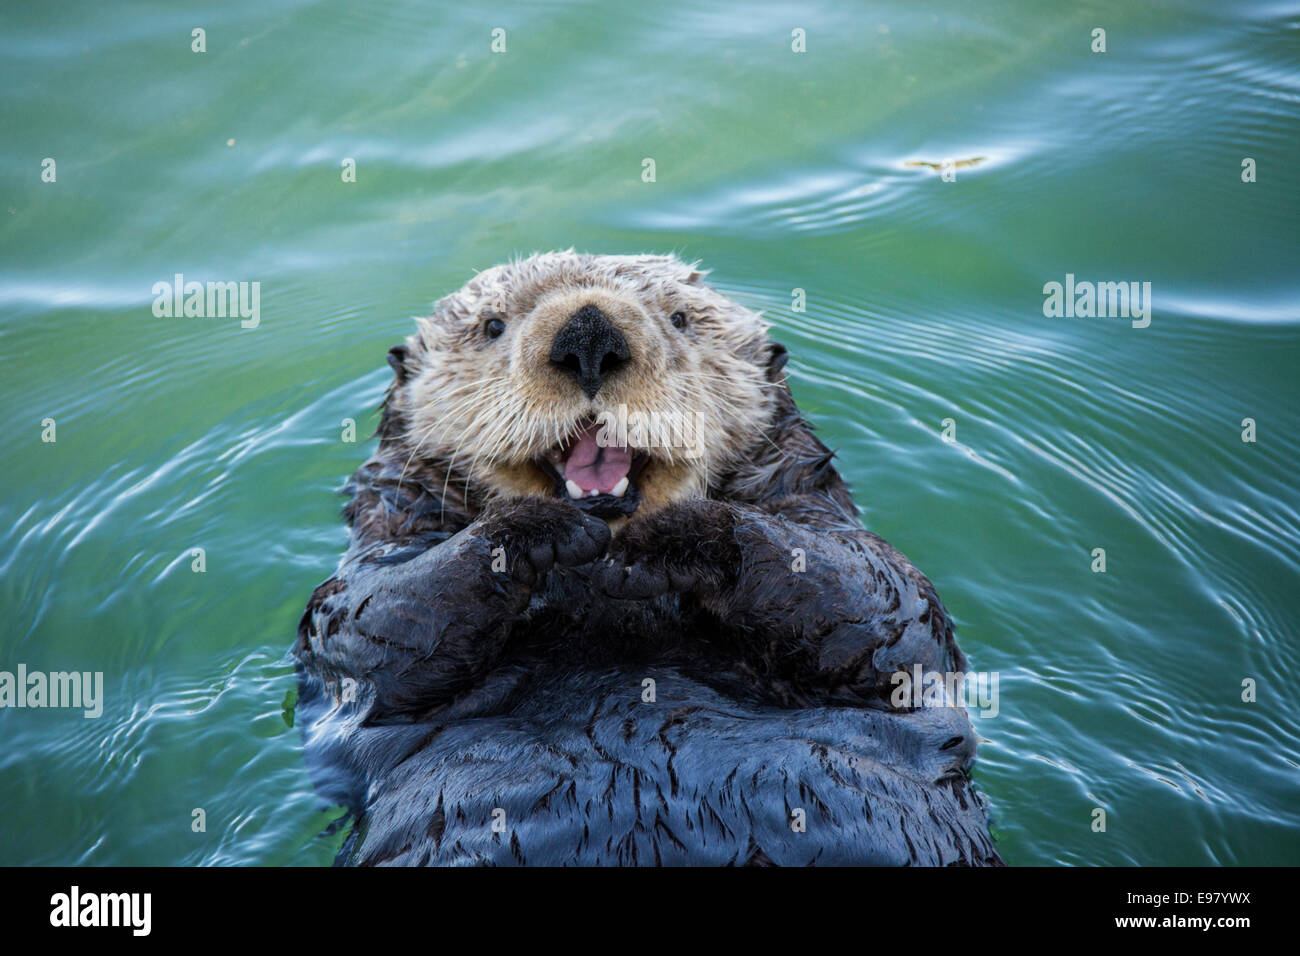 Cute Sea Otter, Enhydra lutris, lying back in the water and appearing to smile or laugh, Seldovia Harbor, Alaska, USA Stock Photo